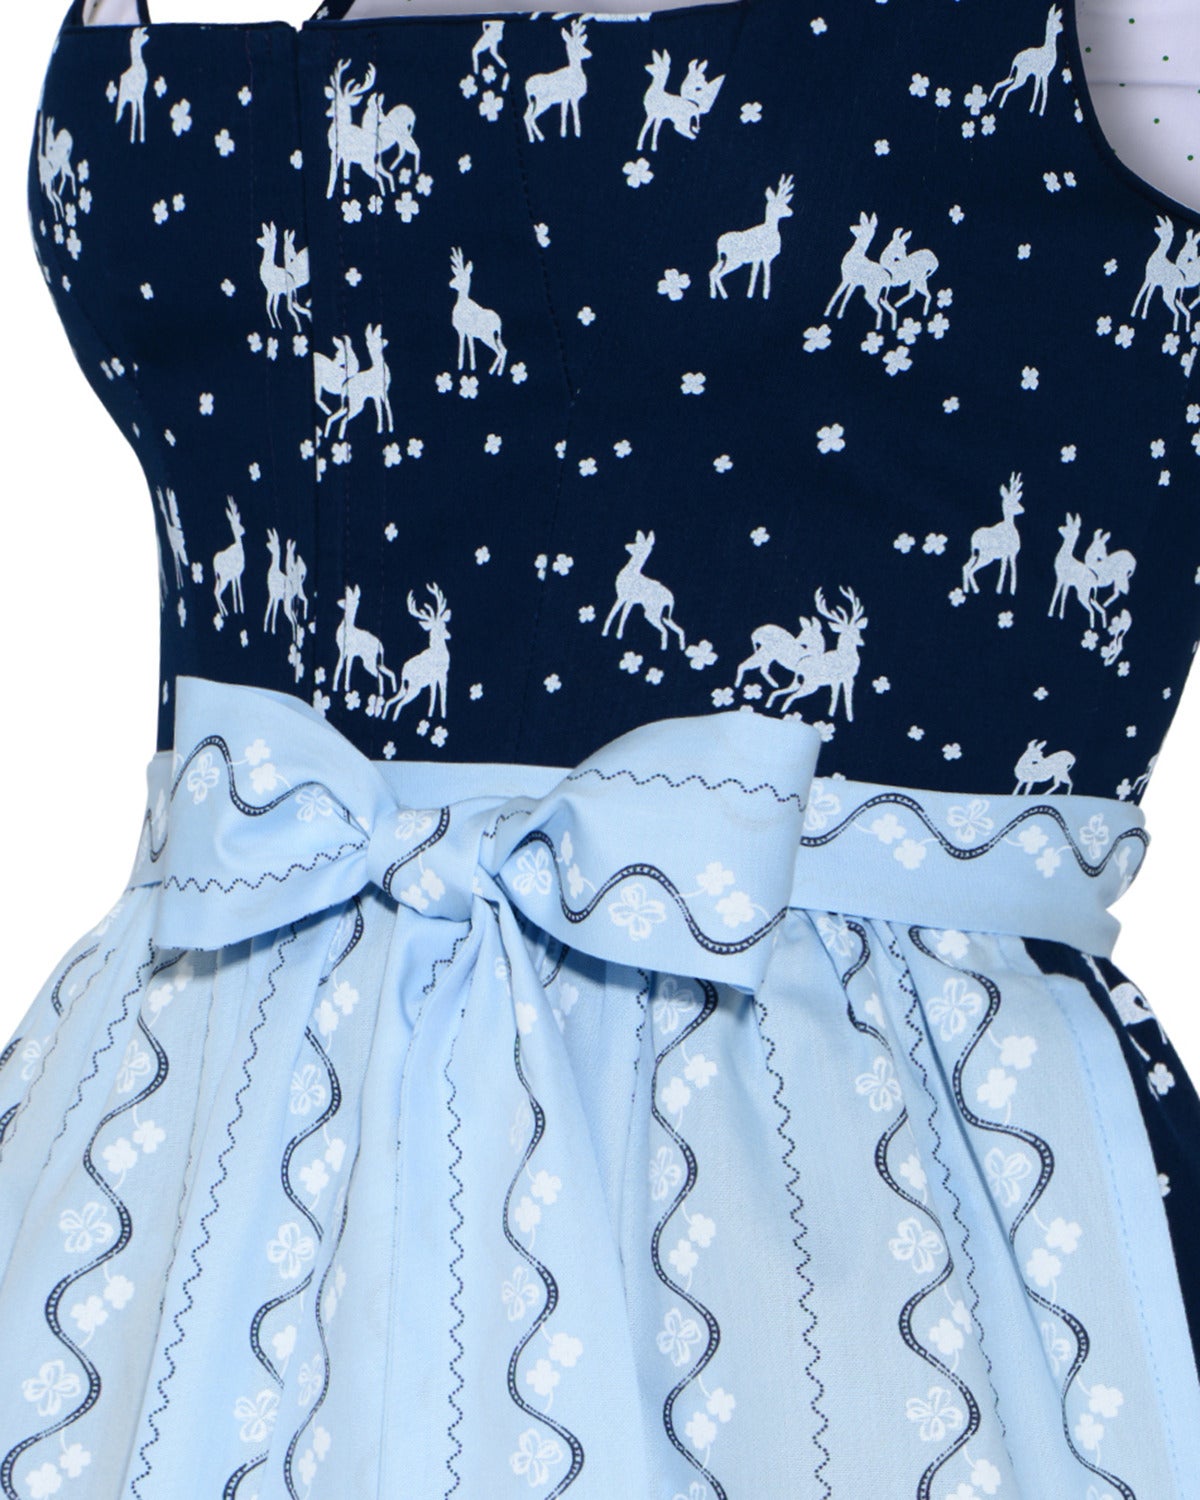 Navy Blue Cotton Silk Dirndl Dress with Pale Blue Apron by Lodenfrey of Munich In New Condition For Sale In London, UK